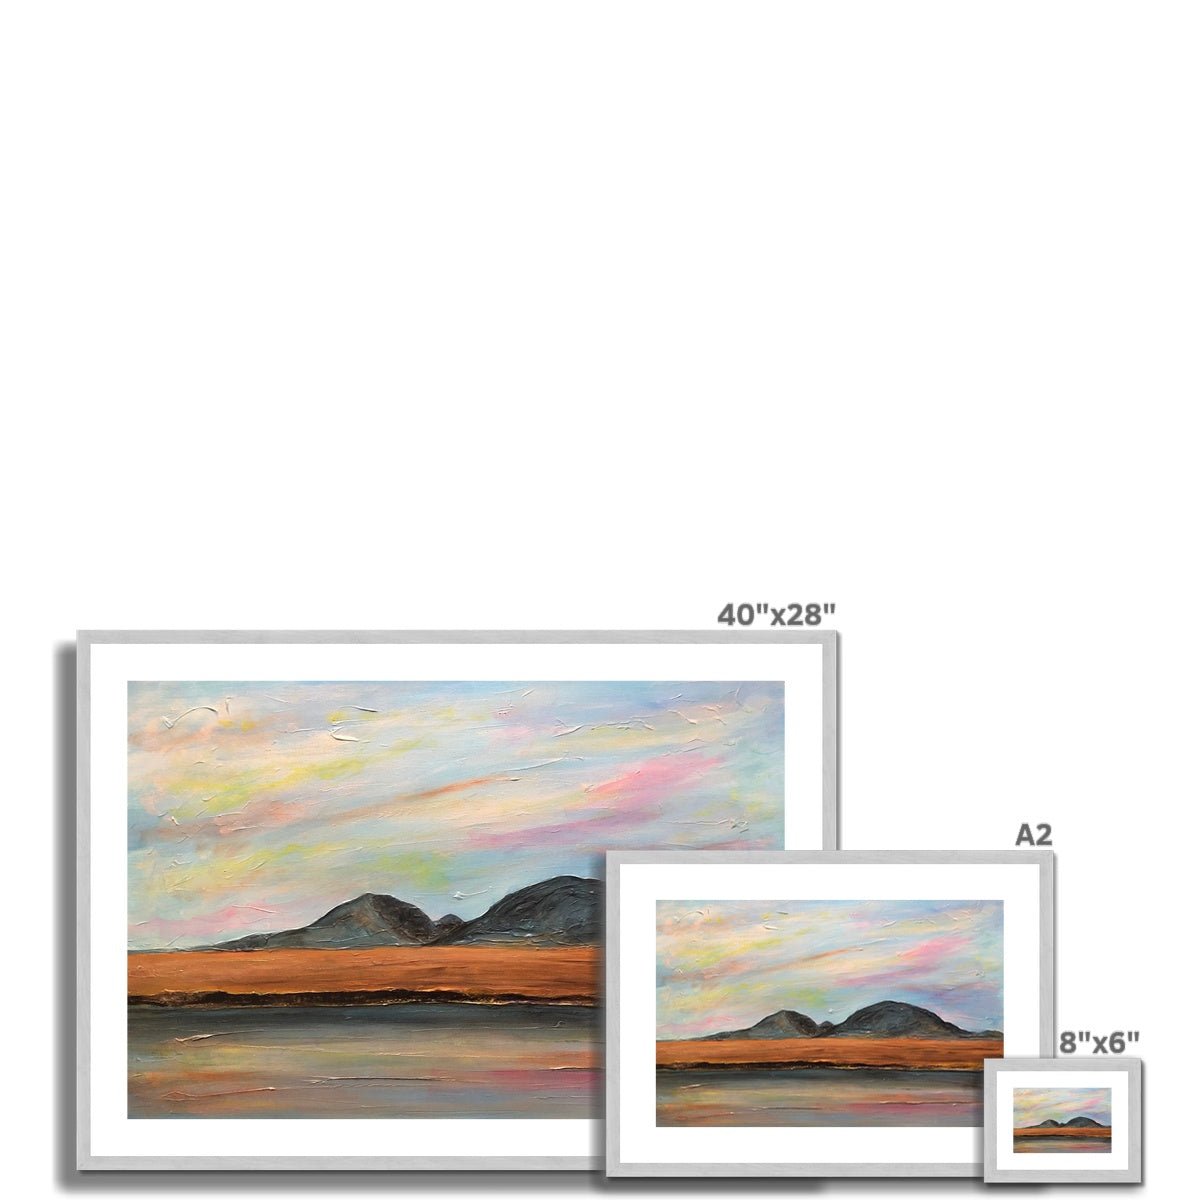 Jura Dawn Painting | Antique Framed & Mounted Prints From Scotland-Antique Framed & Mounted Prints-Hebridean Islands Art Gallery-Paintings, Prints, Homeware, Art Gifts From Scotland By Scottish Artist Kevin Hunter